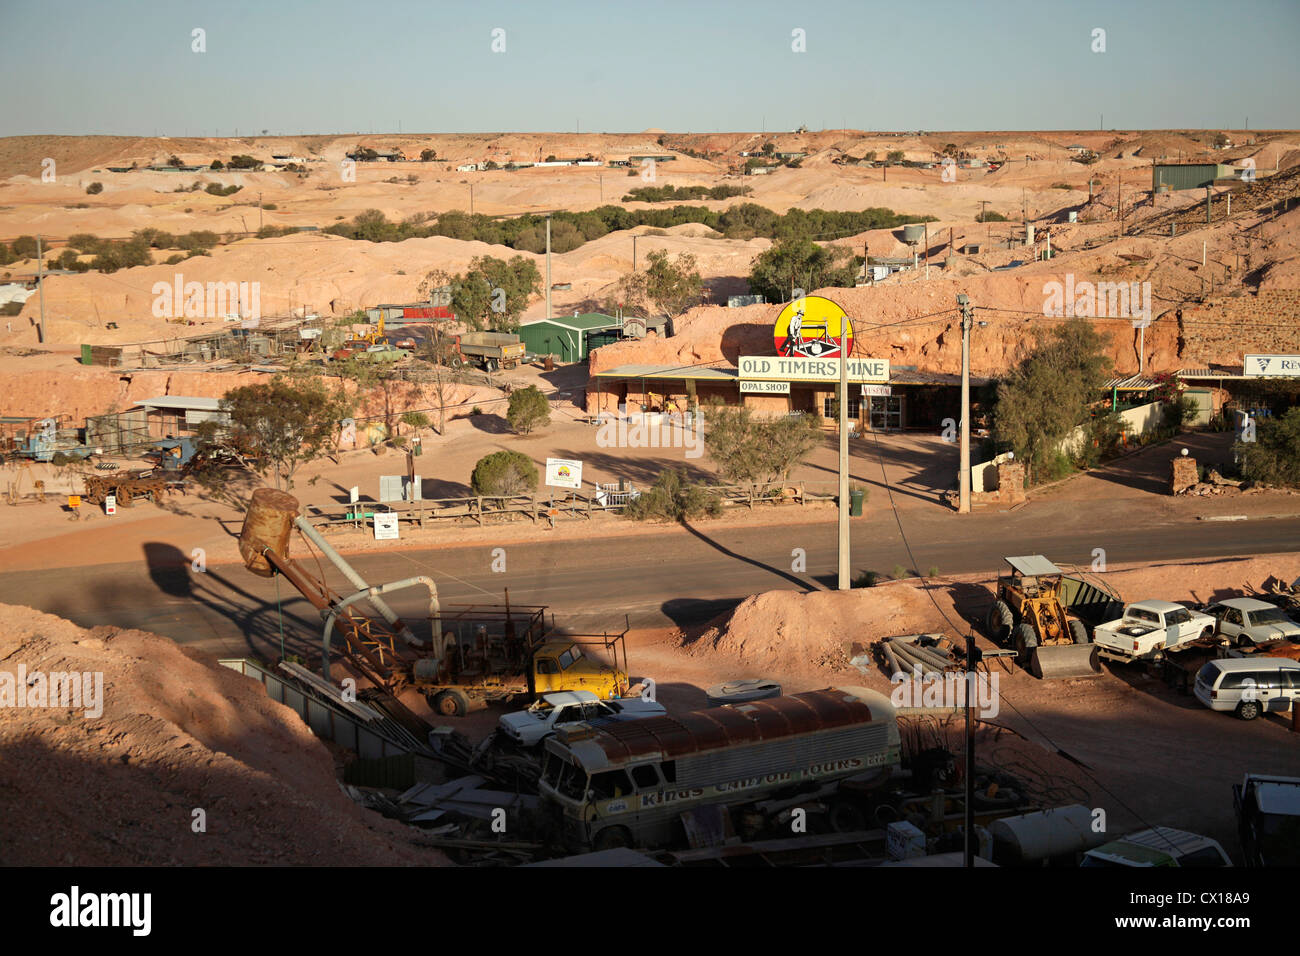 Museum Old timers Mine in Coober Pedy, South Australia, Australia Stock Photo